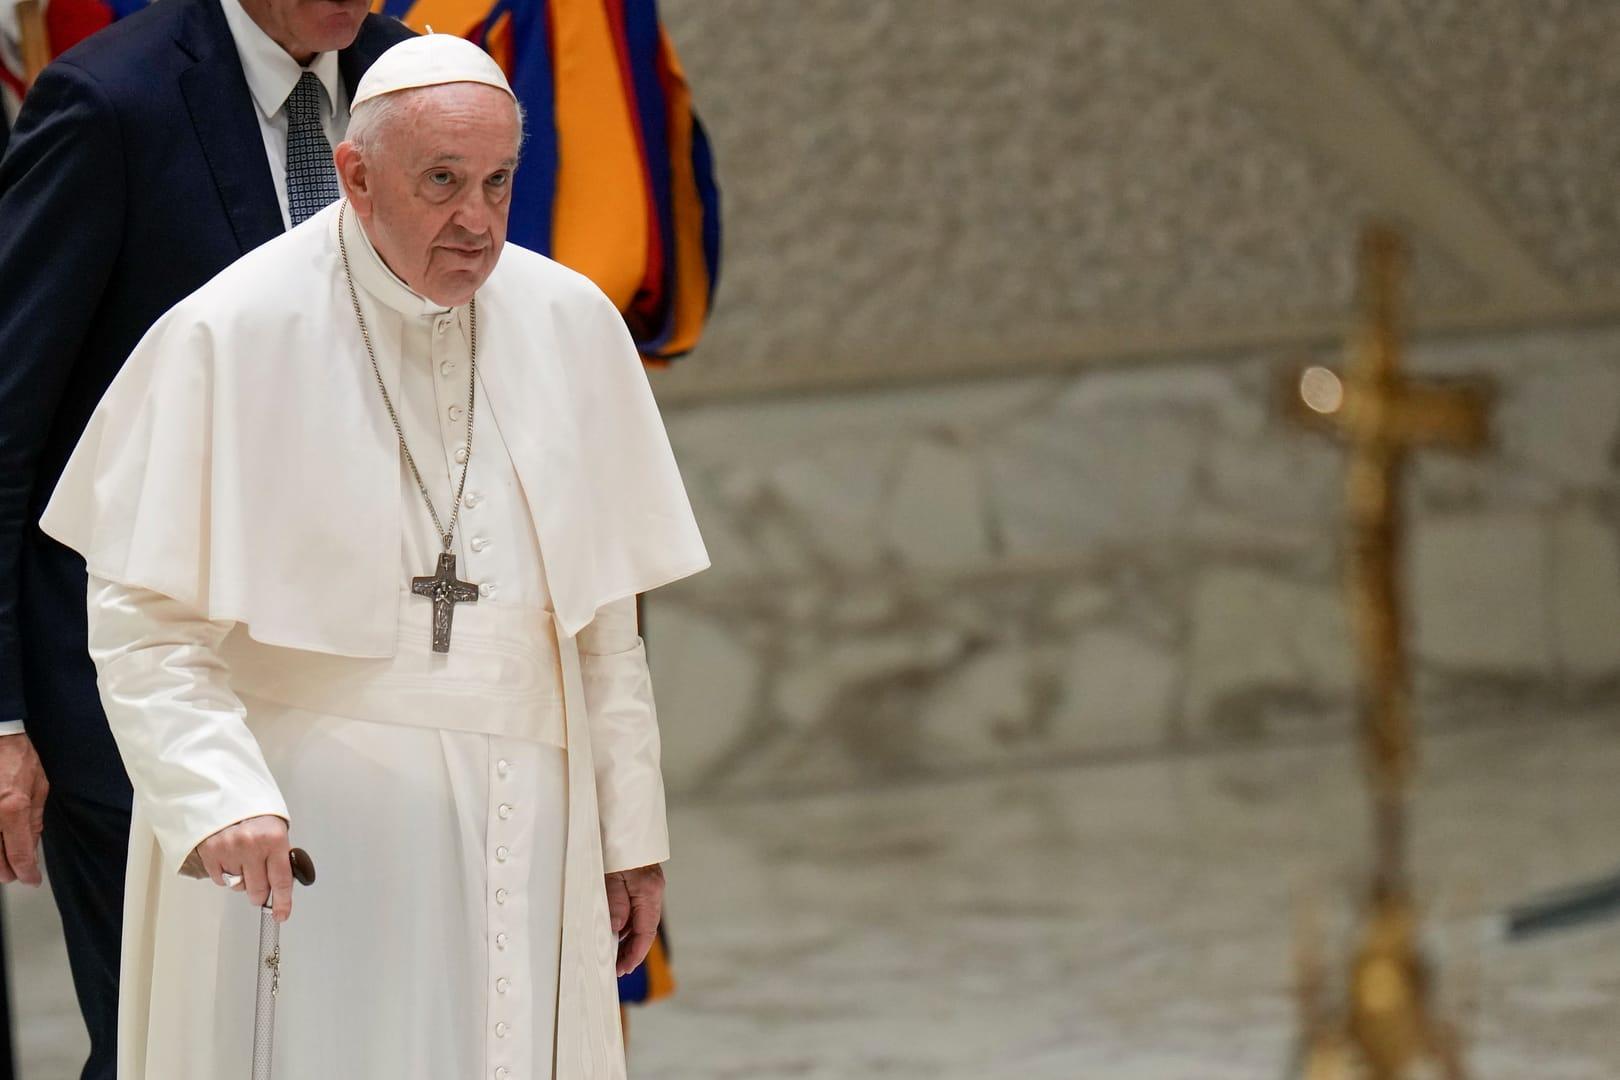 Claims the pope ‘doesn’t understand’ America have a long history